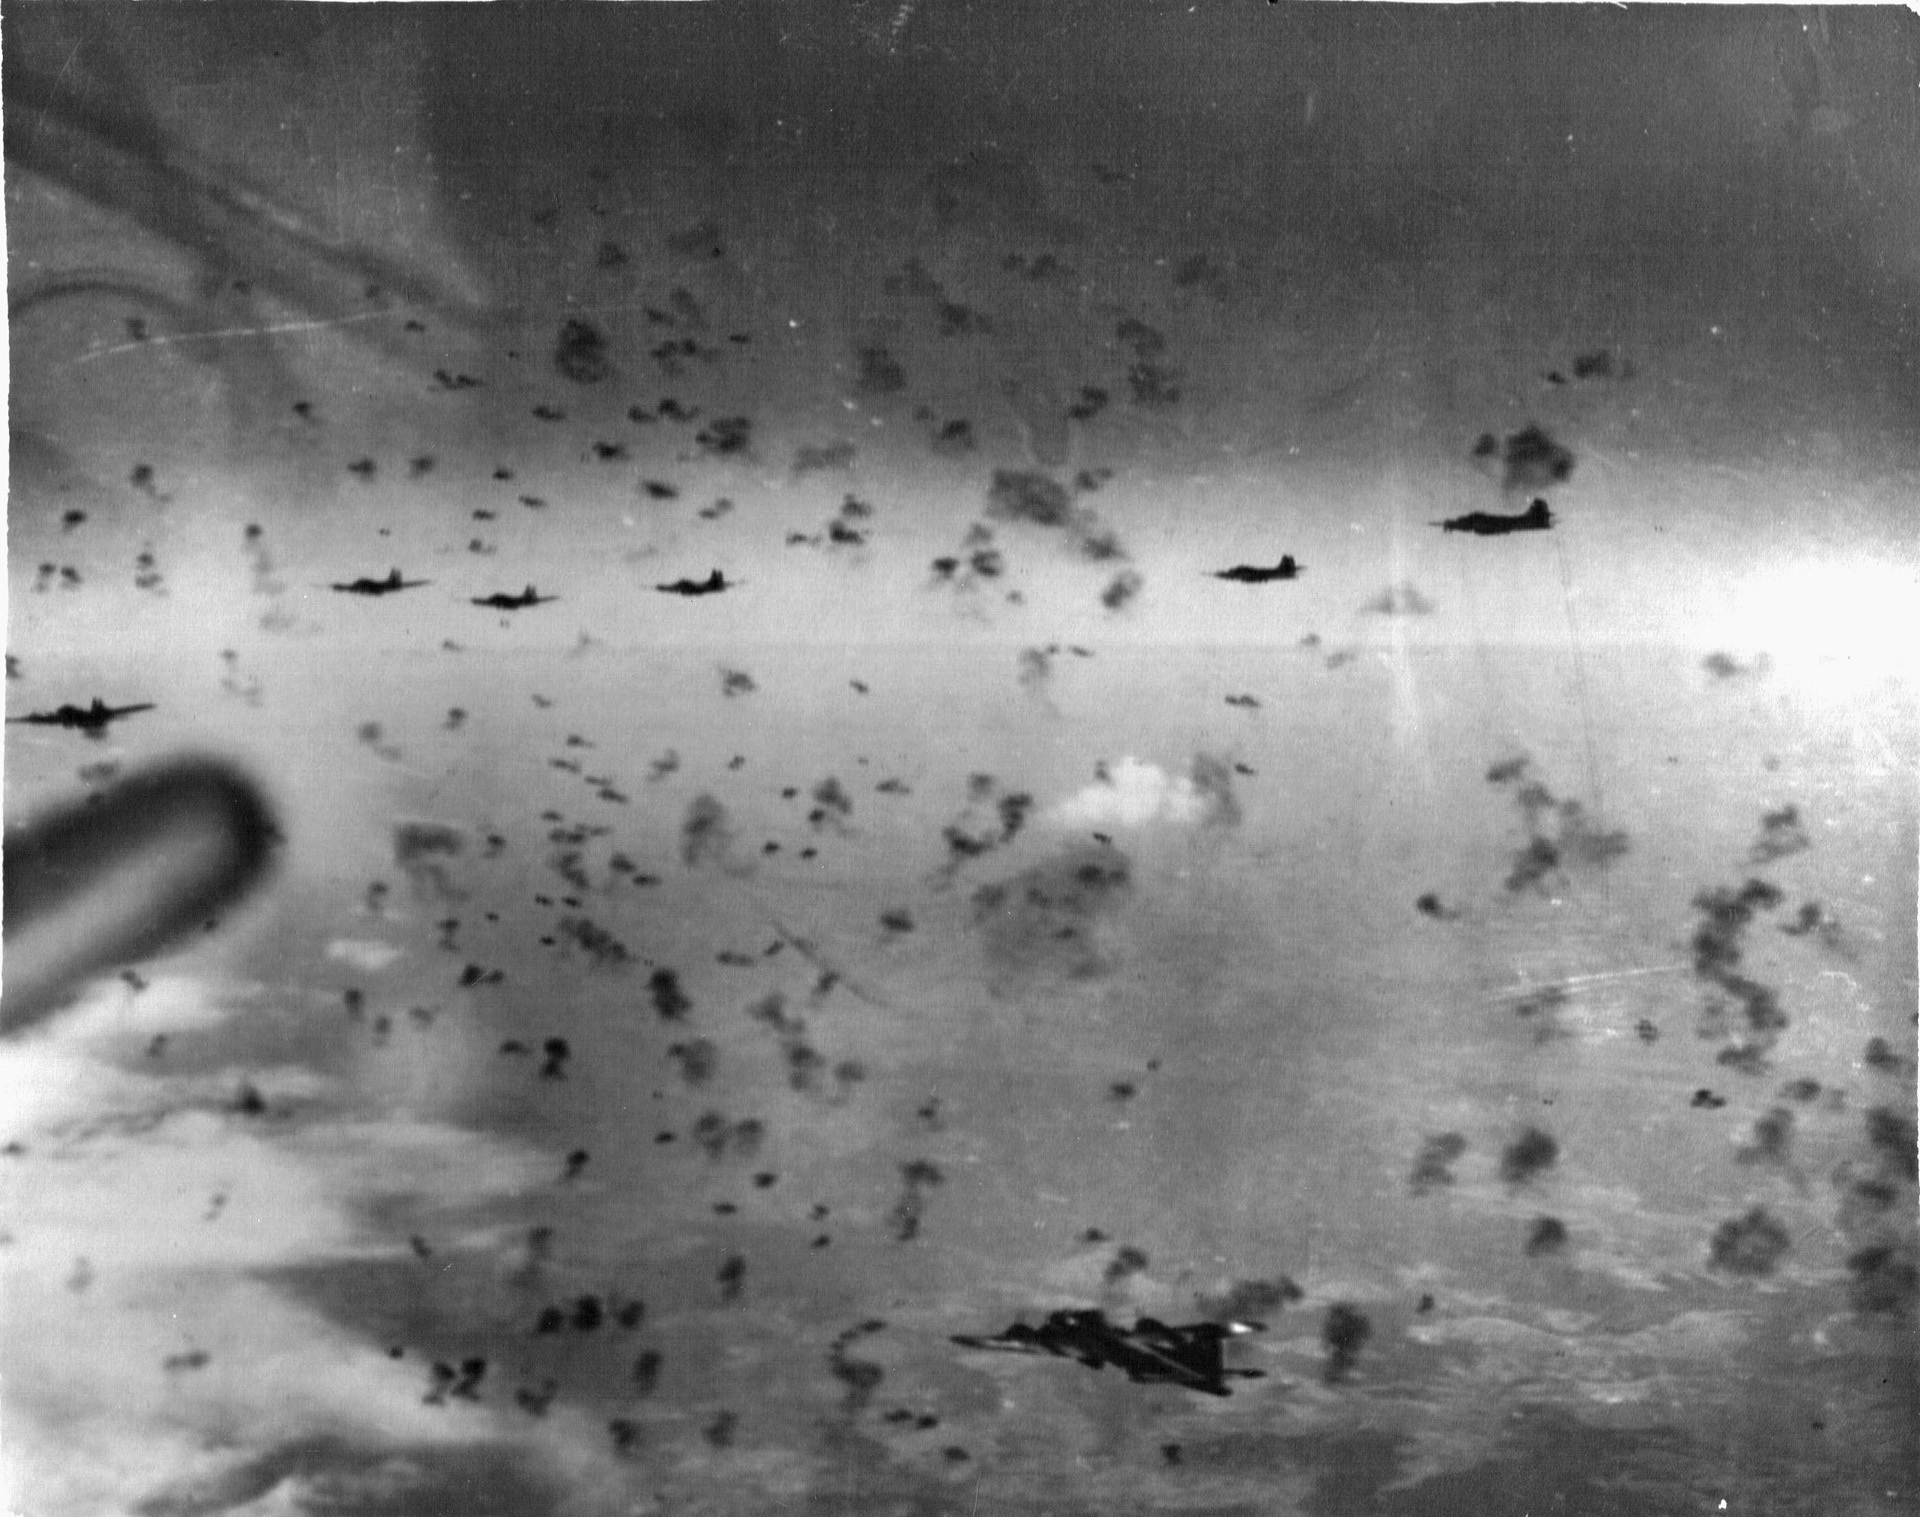 Bomber crews had no defense against anti-aircraft artillery fire. Here B-17s of the 381st Bomb Group fly through deadly bursts of flak over Schweinfurt, 1943. 